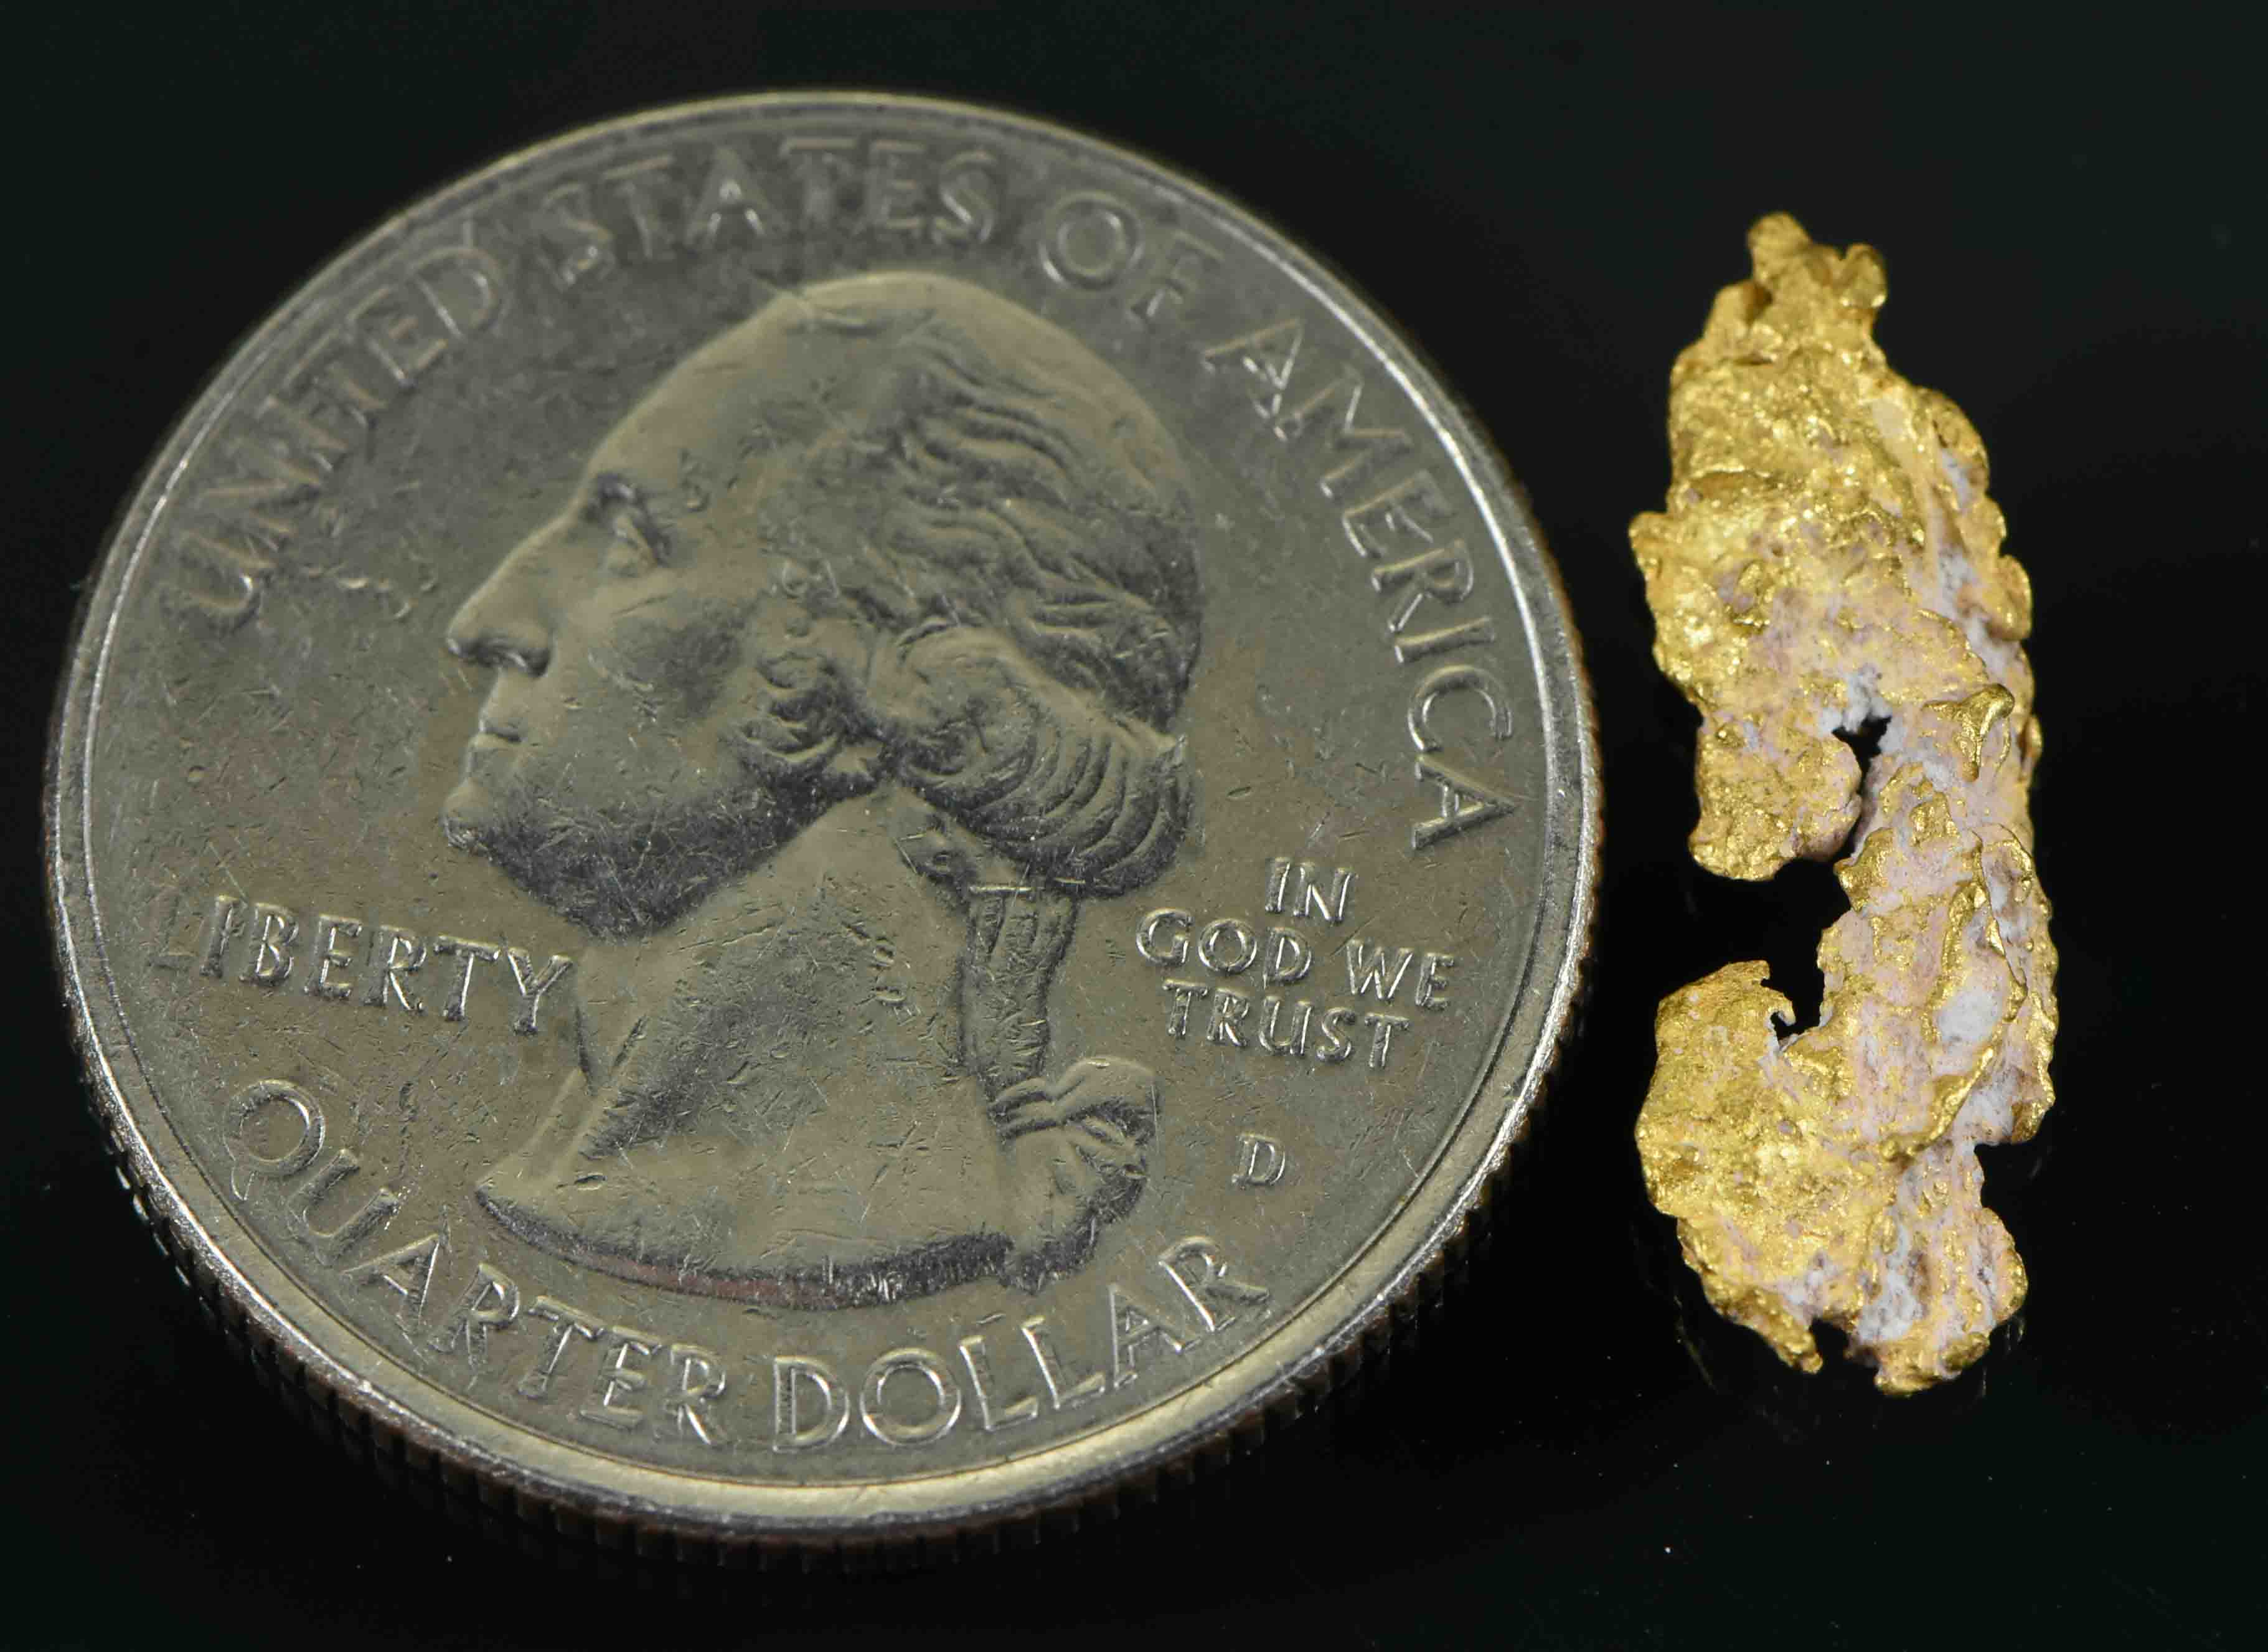 #11 Australian Natural Gold Nugget With Quartz Weighs 1.33 Grams.